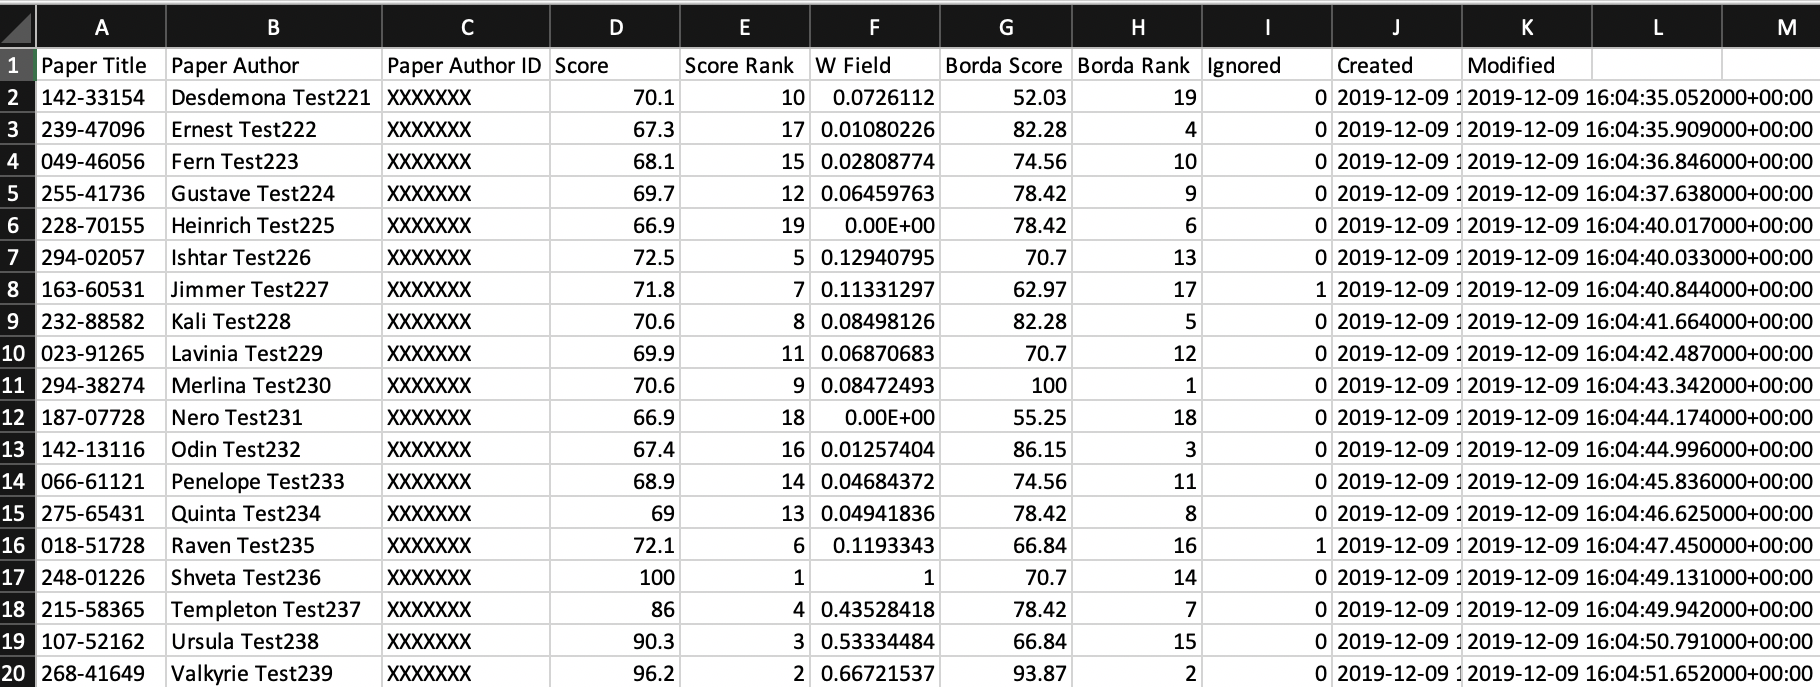 A spreadsheet with final results data.